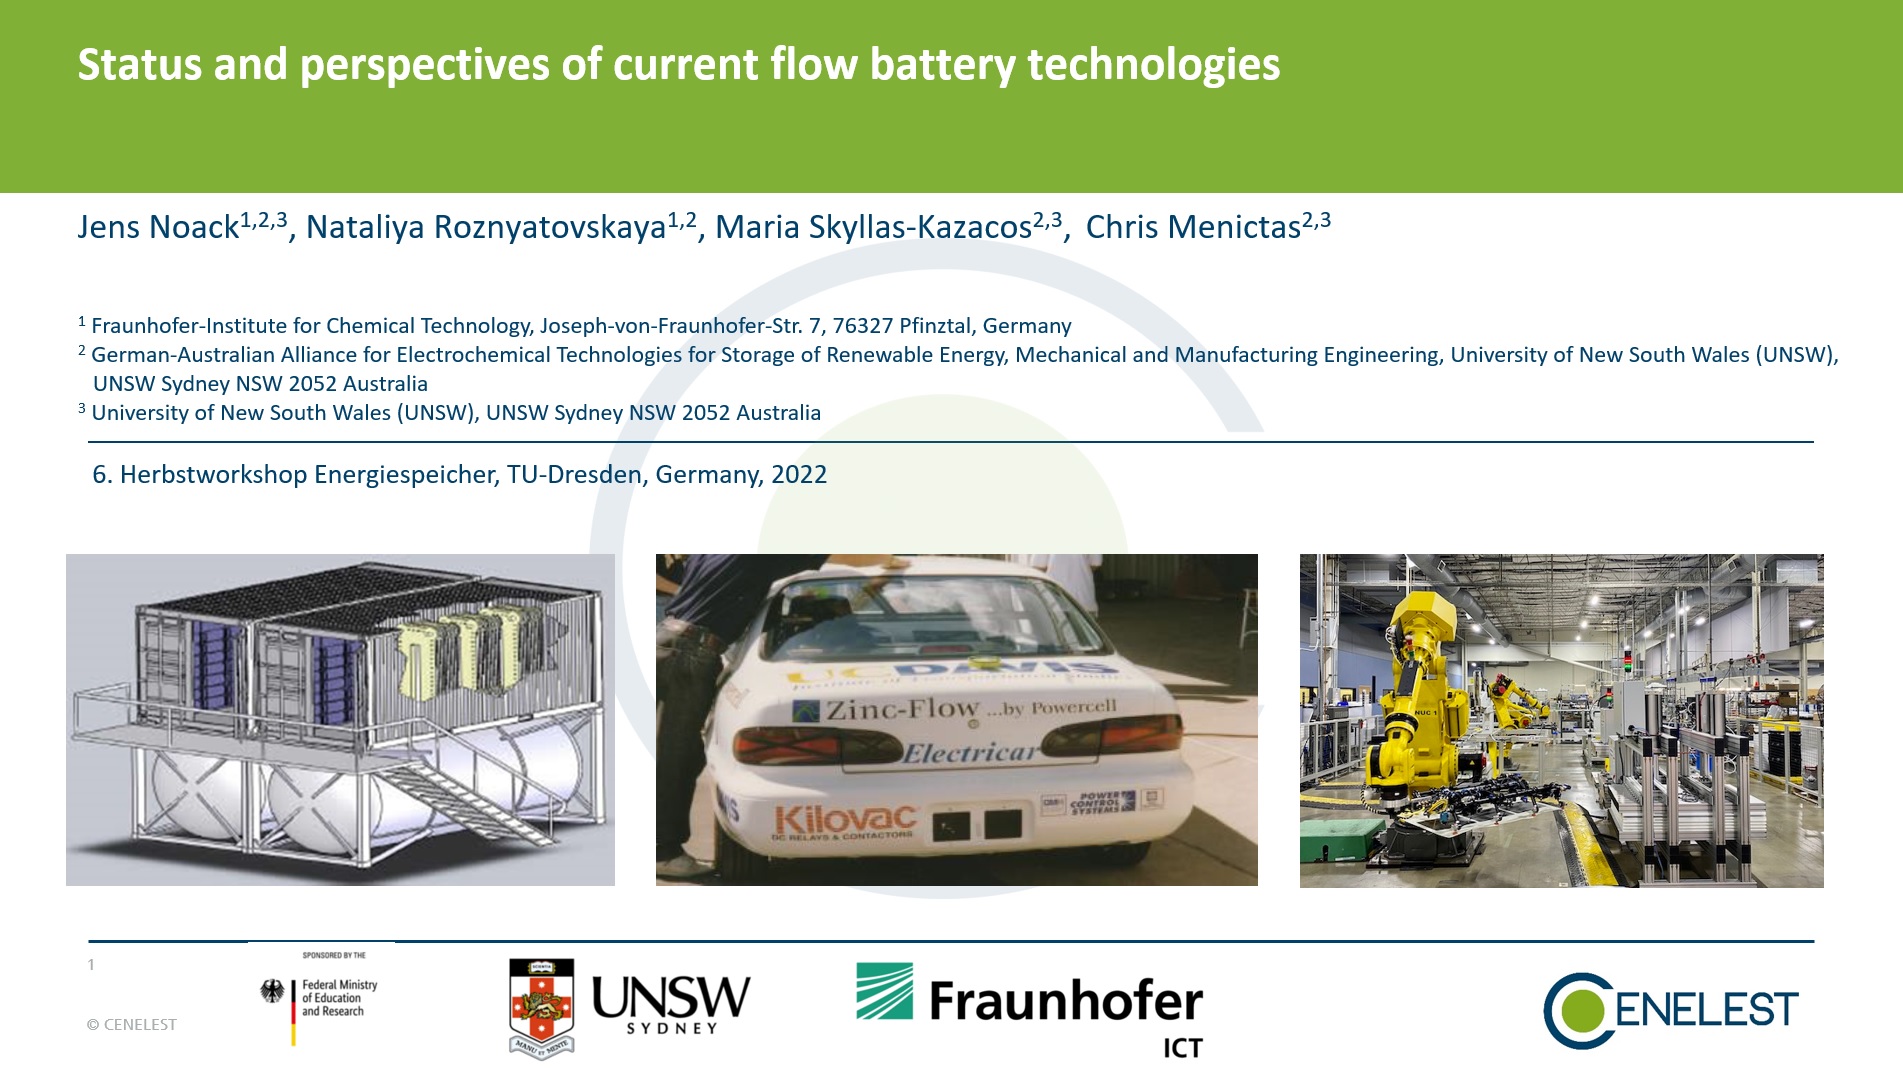 Jens Noack - Status and perspectives of current flow battery technologies